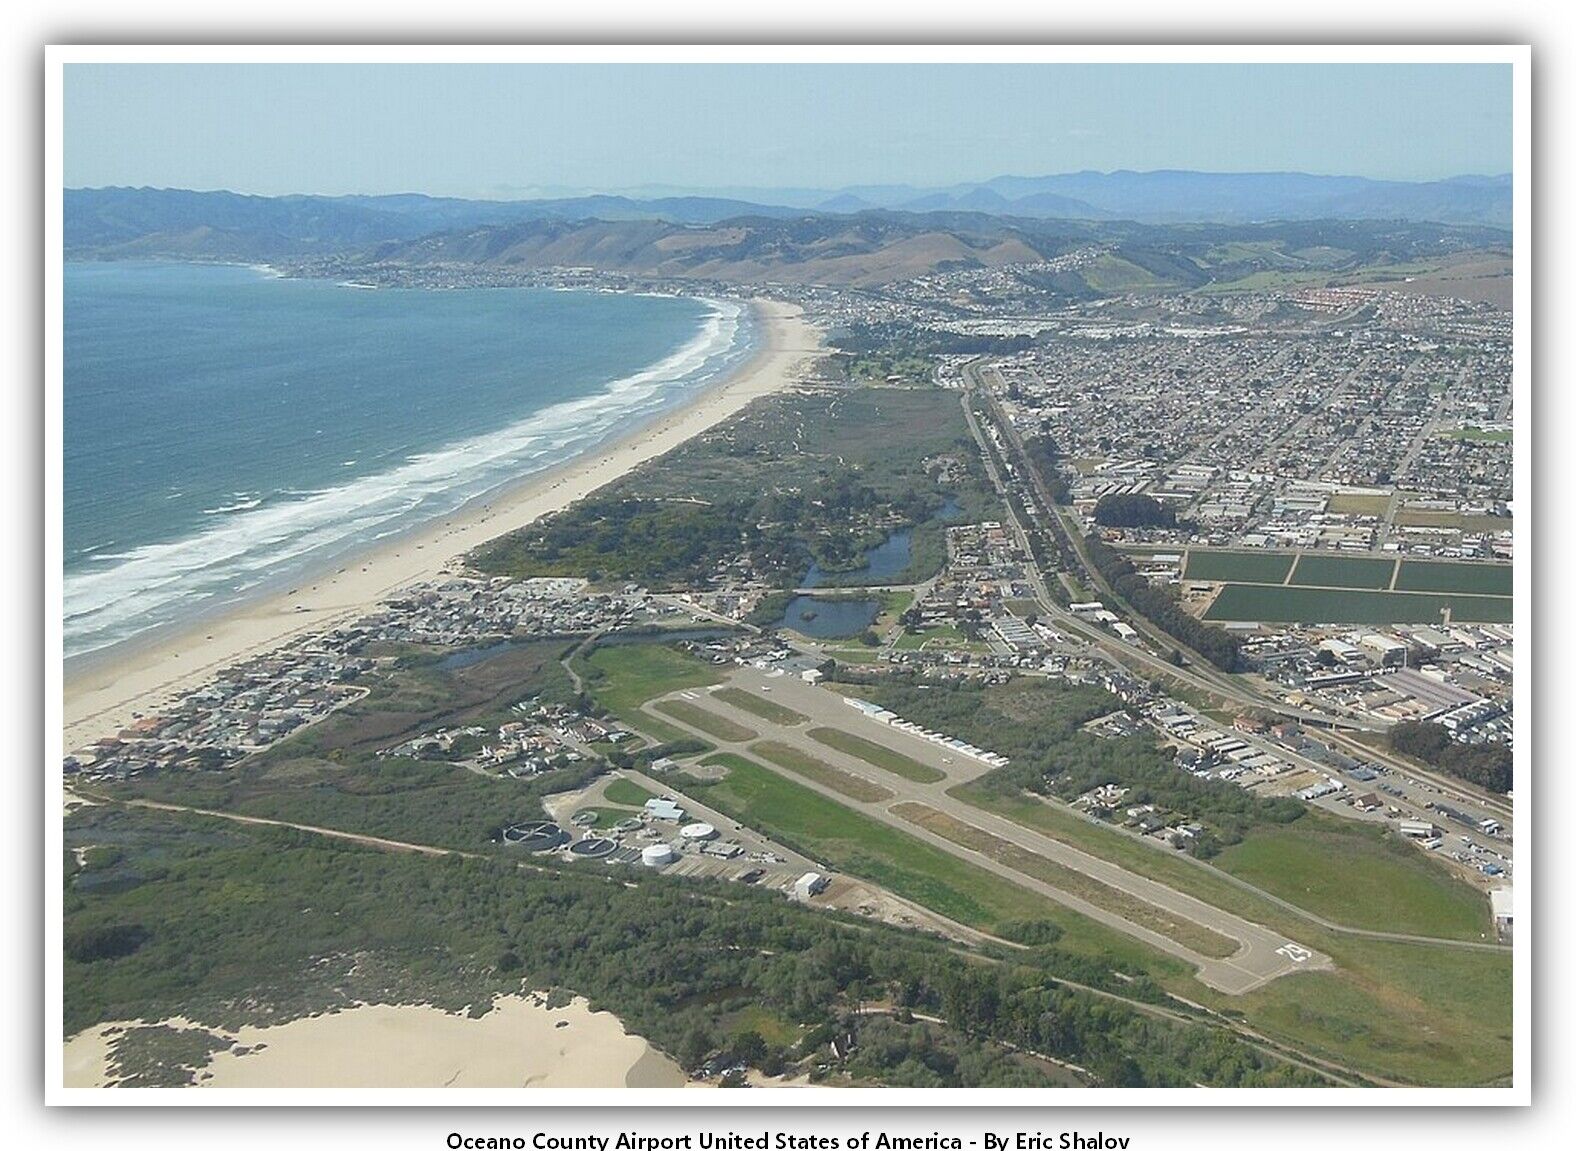 Oceano County Airport United States of America Airport Postcard